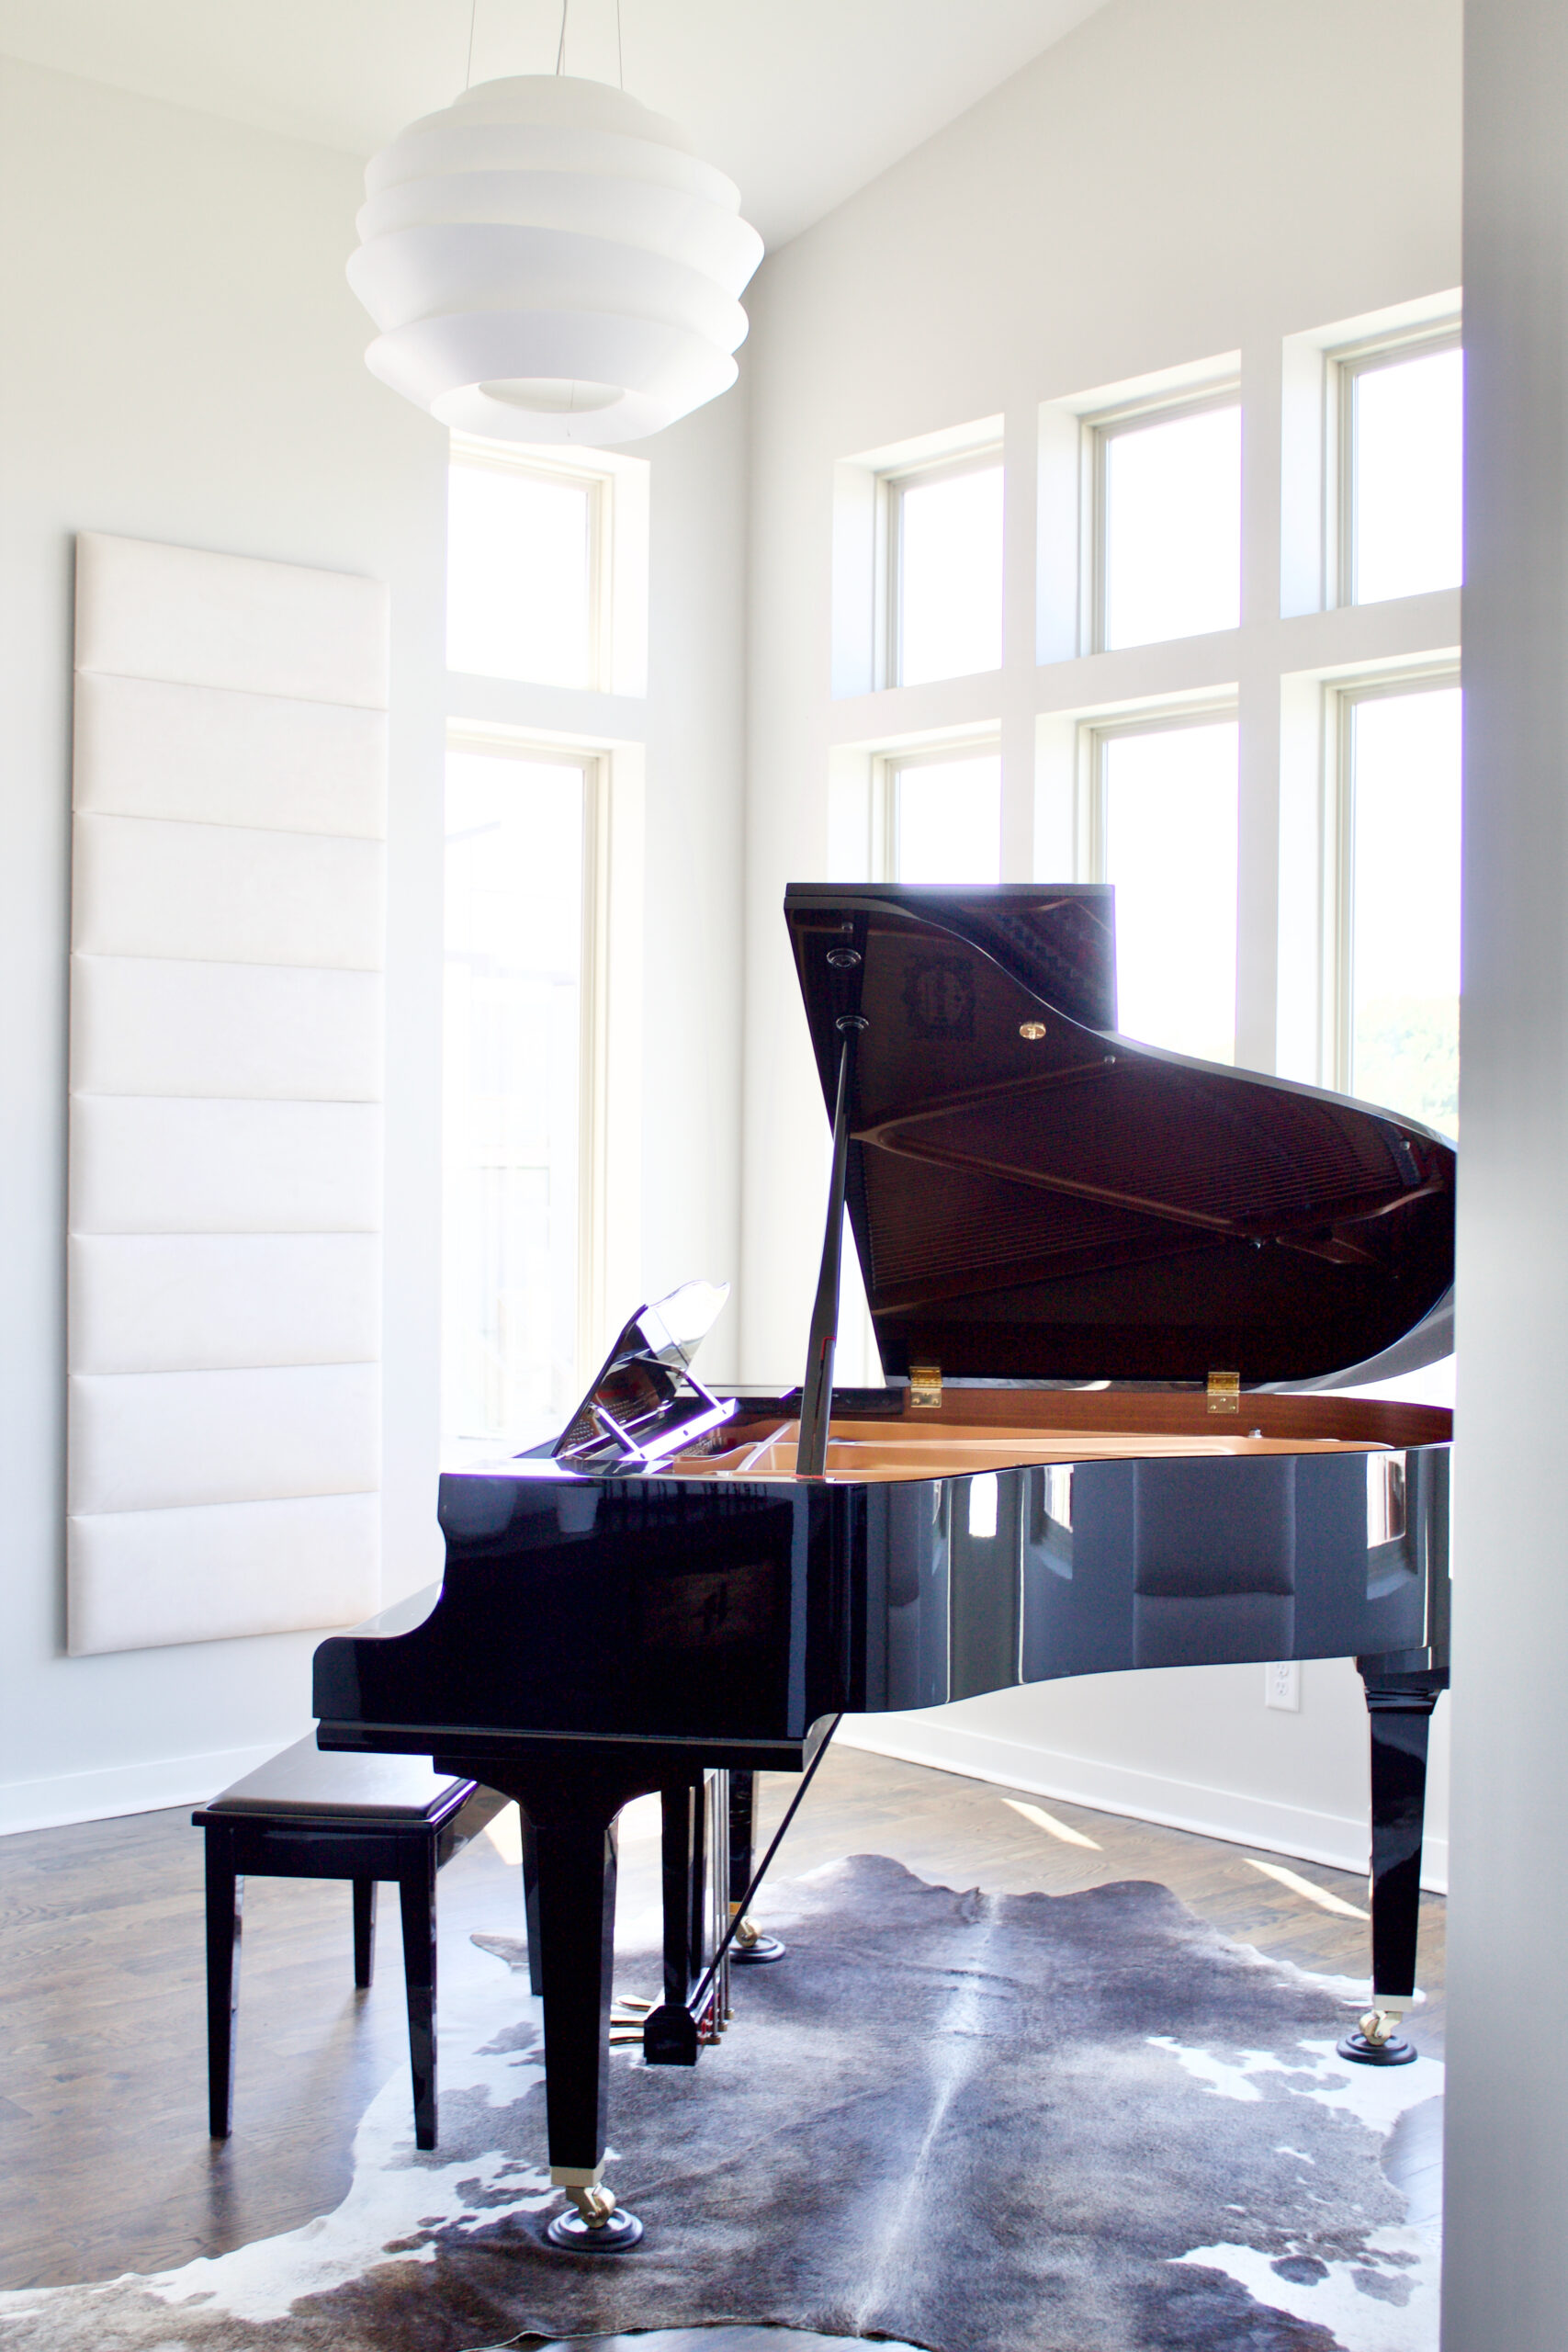 The foyer of our #MinimalModernSouthNashville project features modern entry lighting suspended over a baby grand piano with large windows on three walls and a sloped ceiling that reaches 15'H. The spherical pendant is made of white bands that diffuse the light and create a soft, dimensional glow. Light is also projected directly upward and downward to dramatically highlight the space, making it the perfect welcoming statement piece. Interior wall and ceiling color is Sherwin Williams Repose Gray SW 7015. The trim is bright white. #SherwinWilliamsReposeGrayInteriorWalls #ReposeGraySW7015 #interiorpaintcolor #lightgrayinteriorpaintcolors